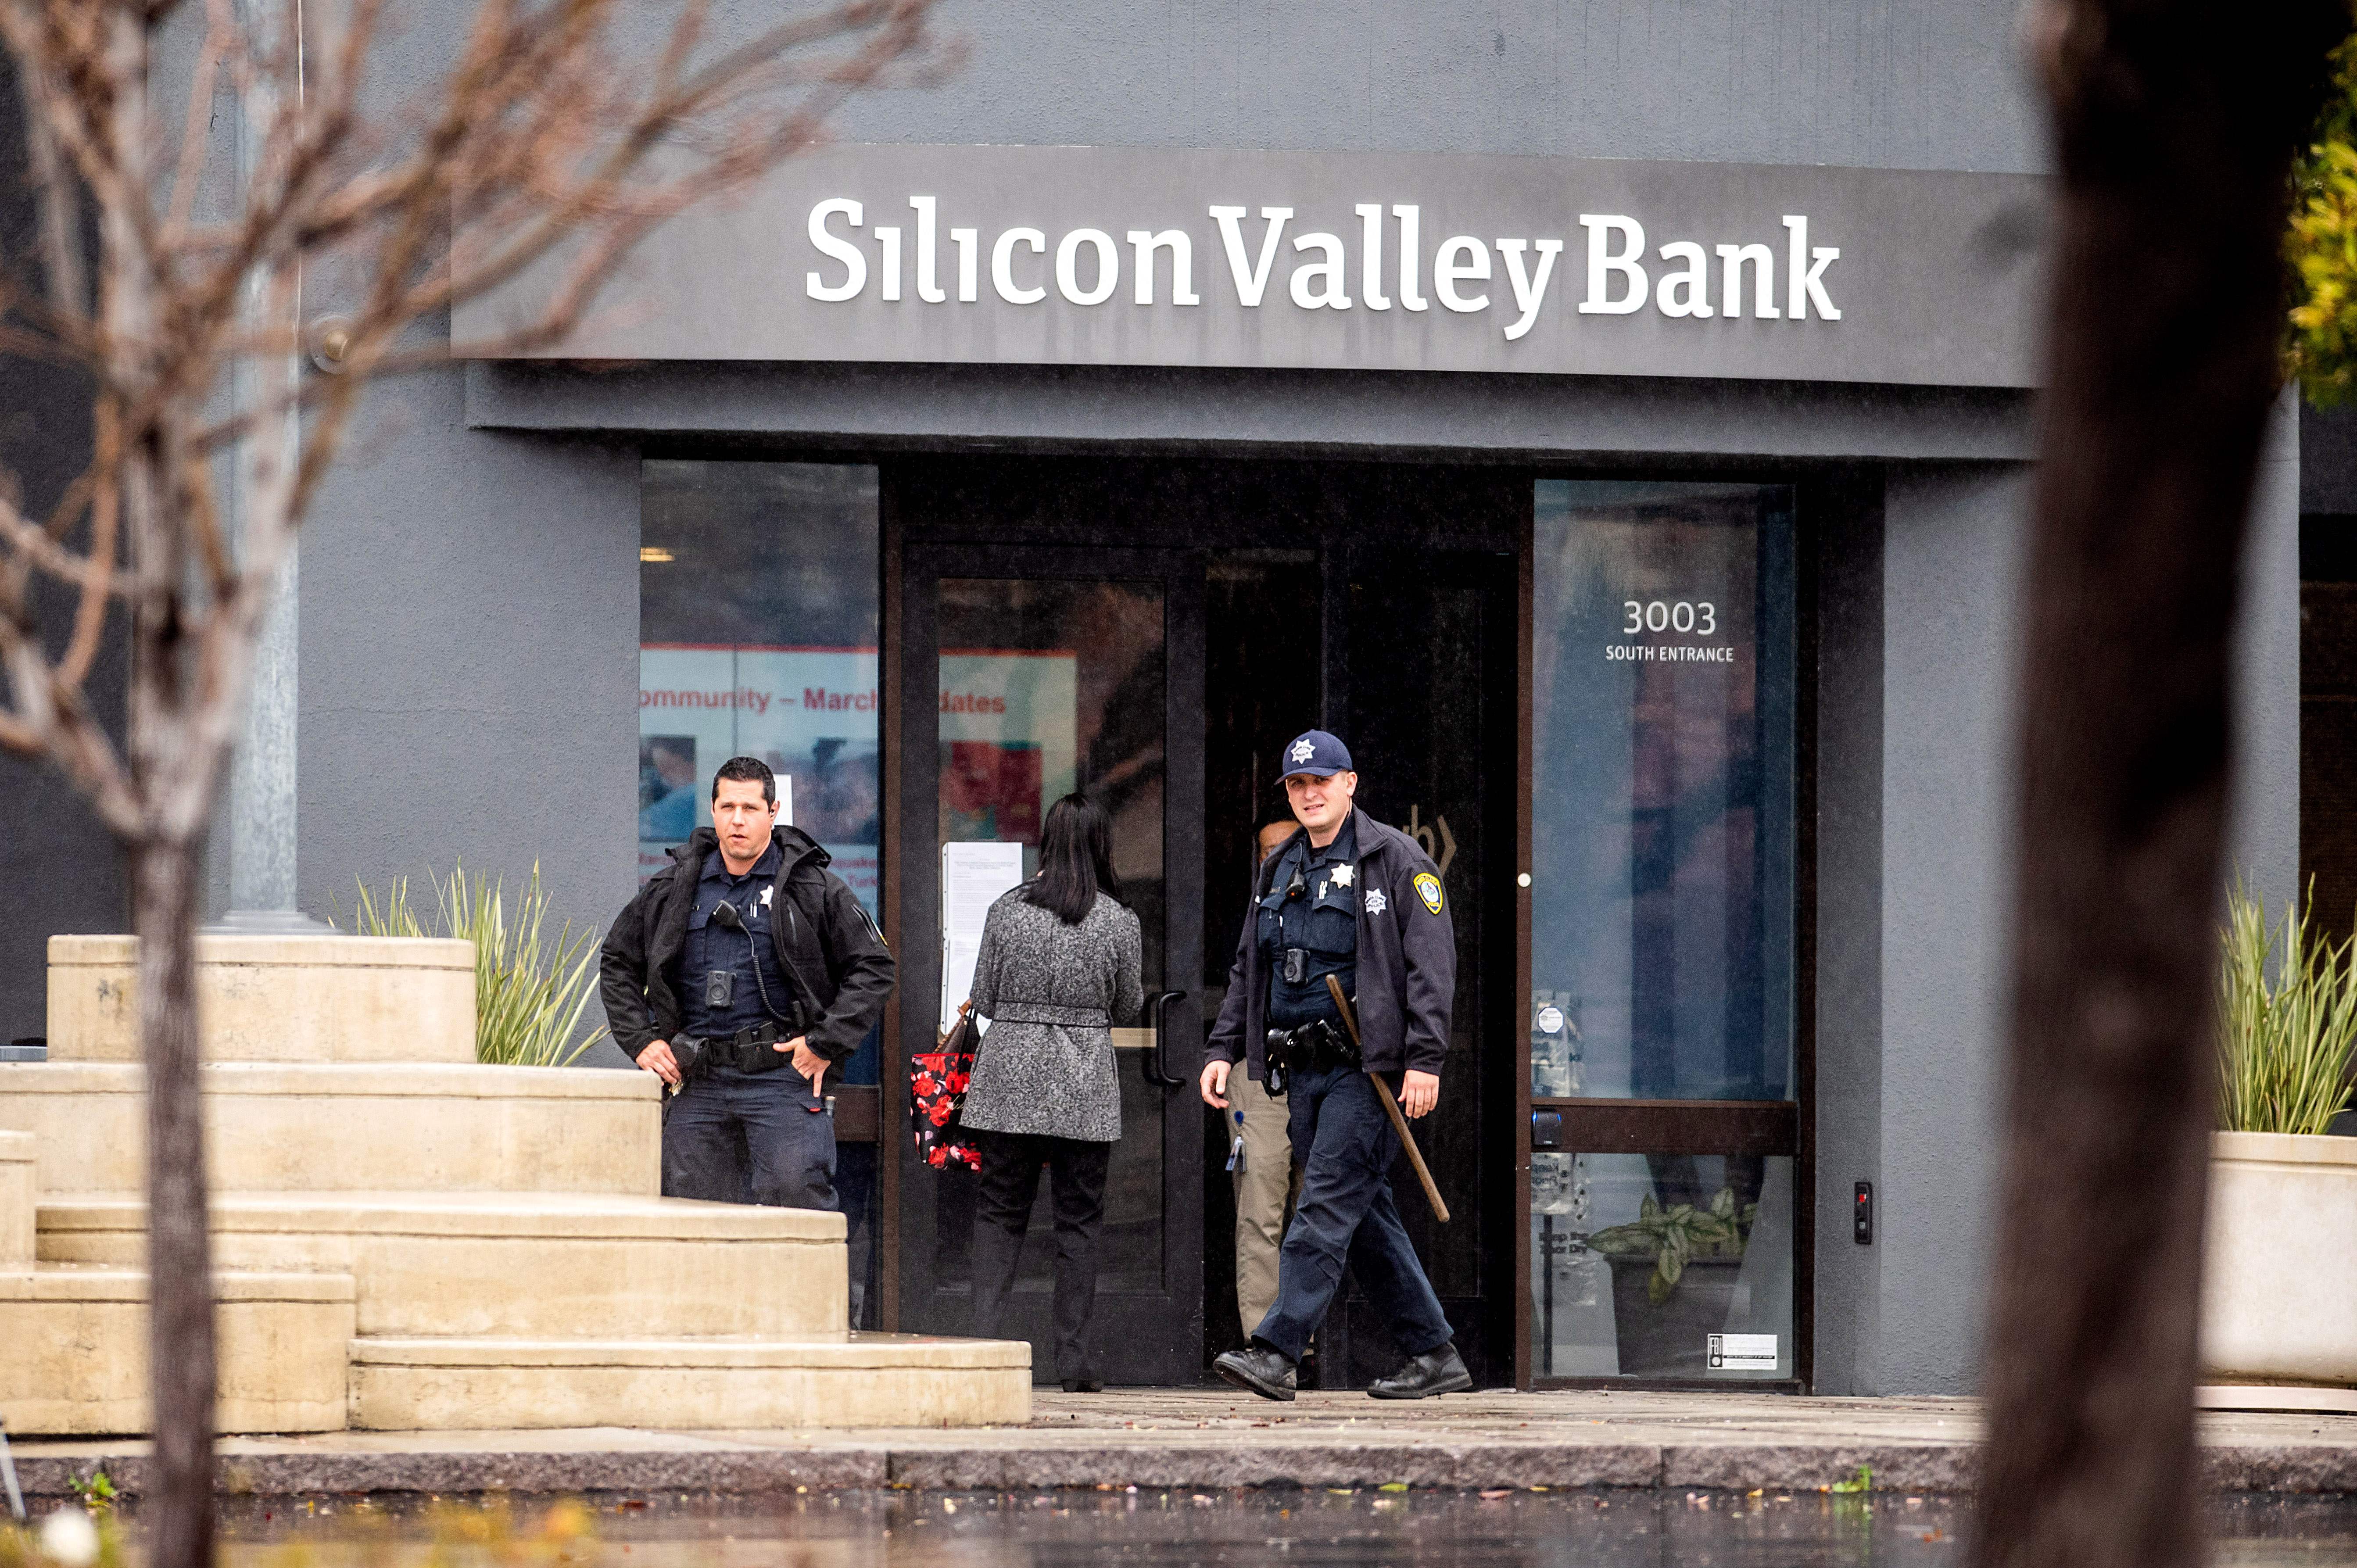 Silicon Valley Bank employees received bonuses hours before the takeover